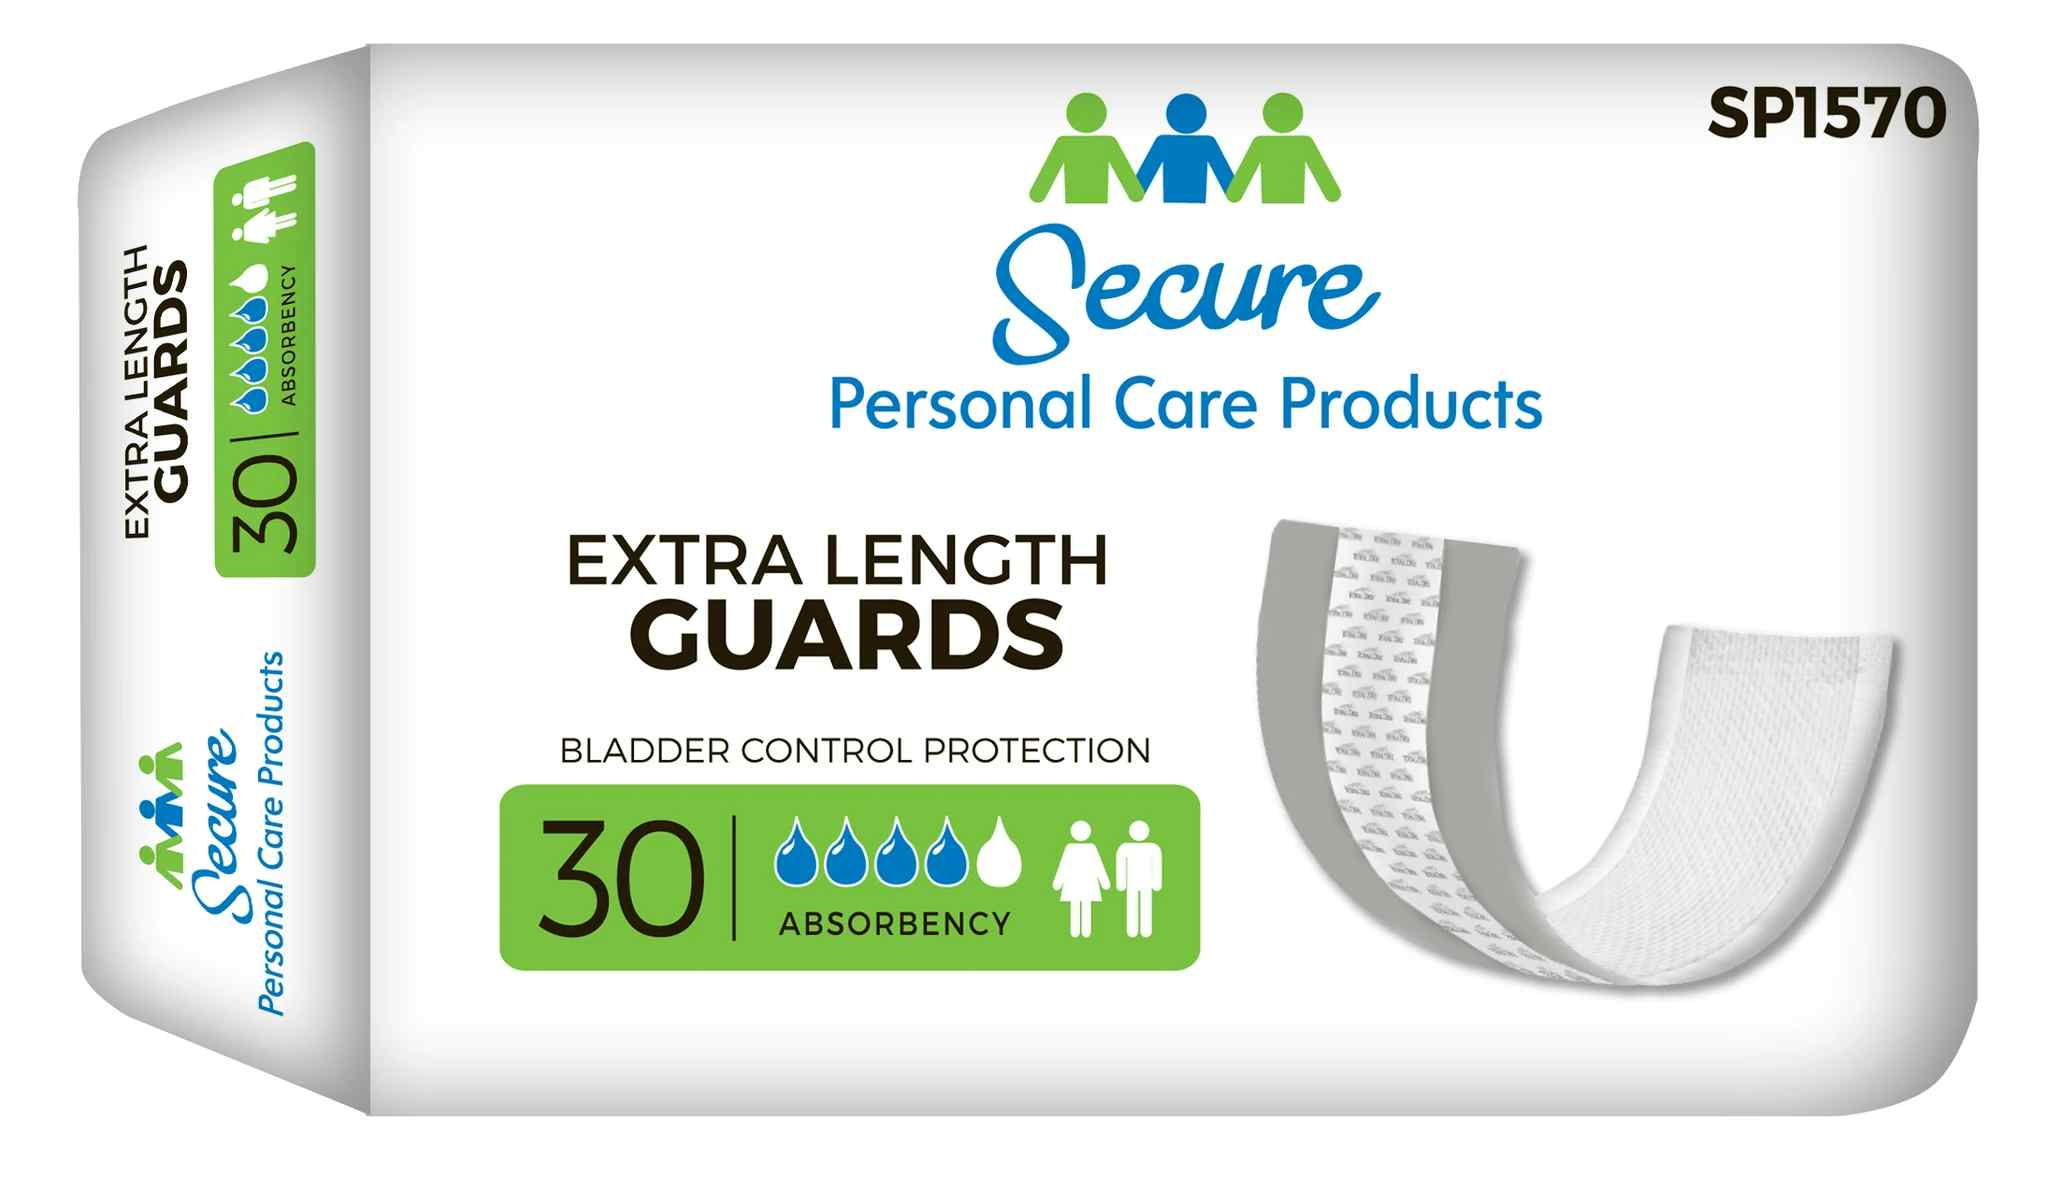 Secure Personal Care Products Extra Length Guards Bladder Control Pads, SP1570, 12" - Bag of 30